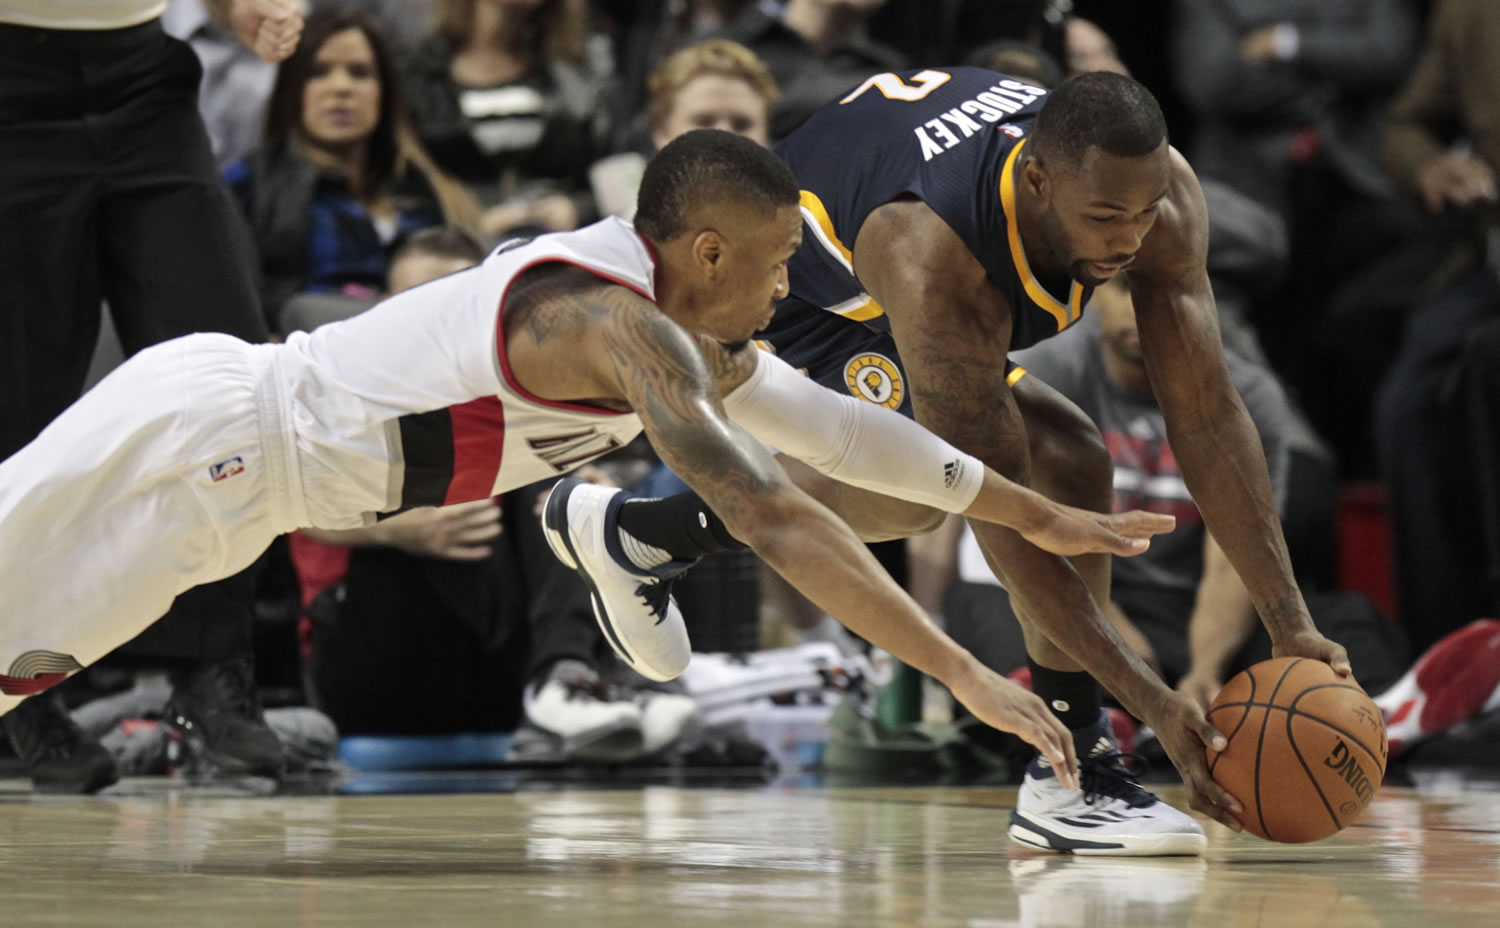 Portland Trail Blazers guard Damian Lillard (0) reaches for a loose ball against Indiana Pacers guard Rodney Stuckey (2) during the second half of an NBA basketball game in Portland, Ore., Thursday, Dec. 3, 2015. The Trail Blazers won 123-111.